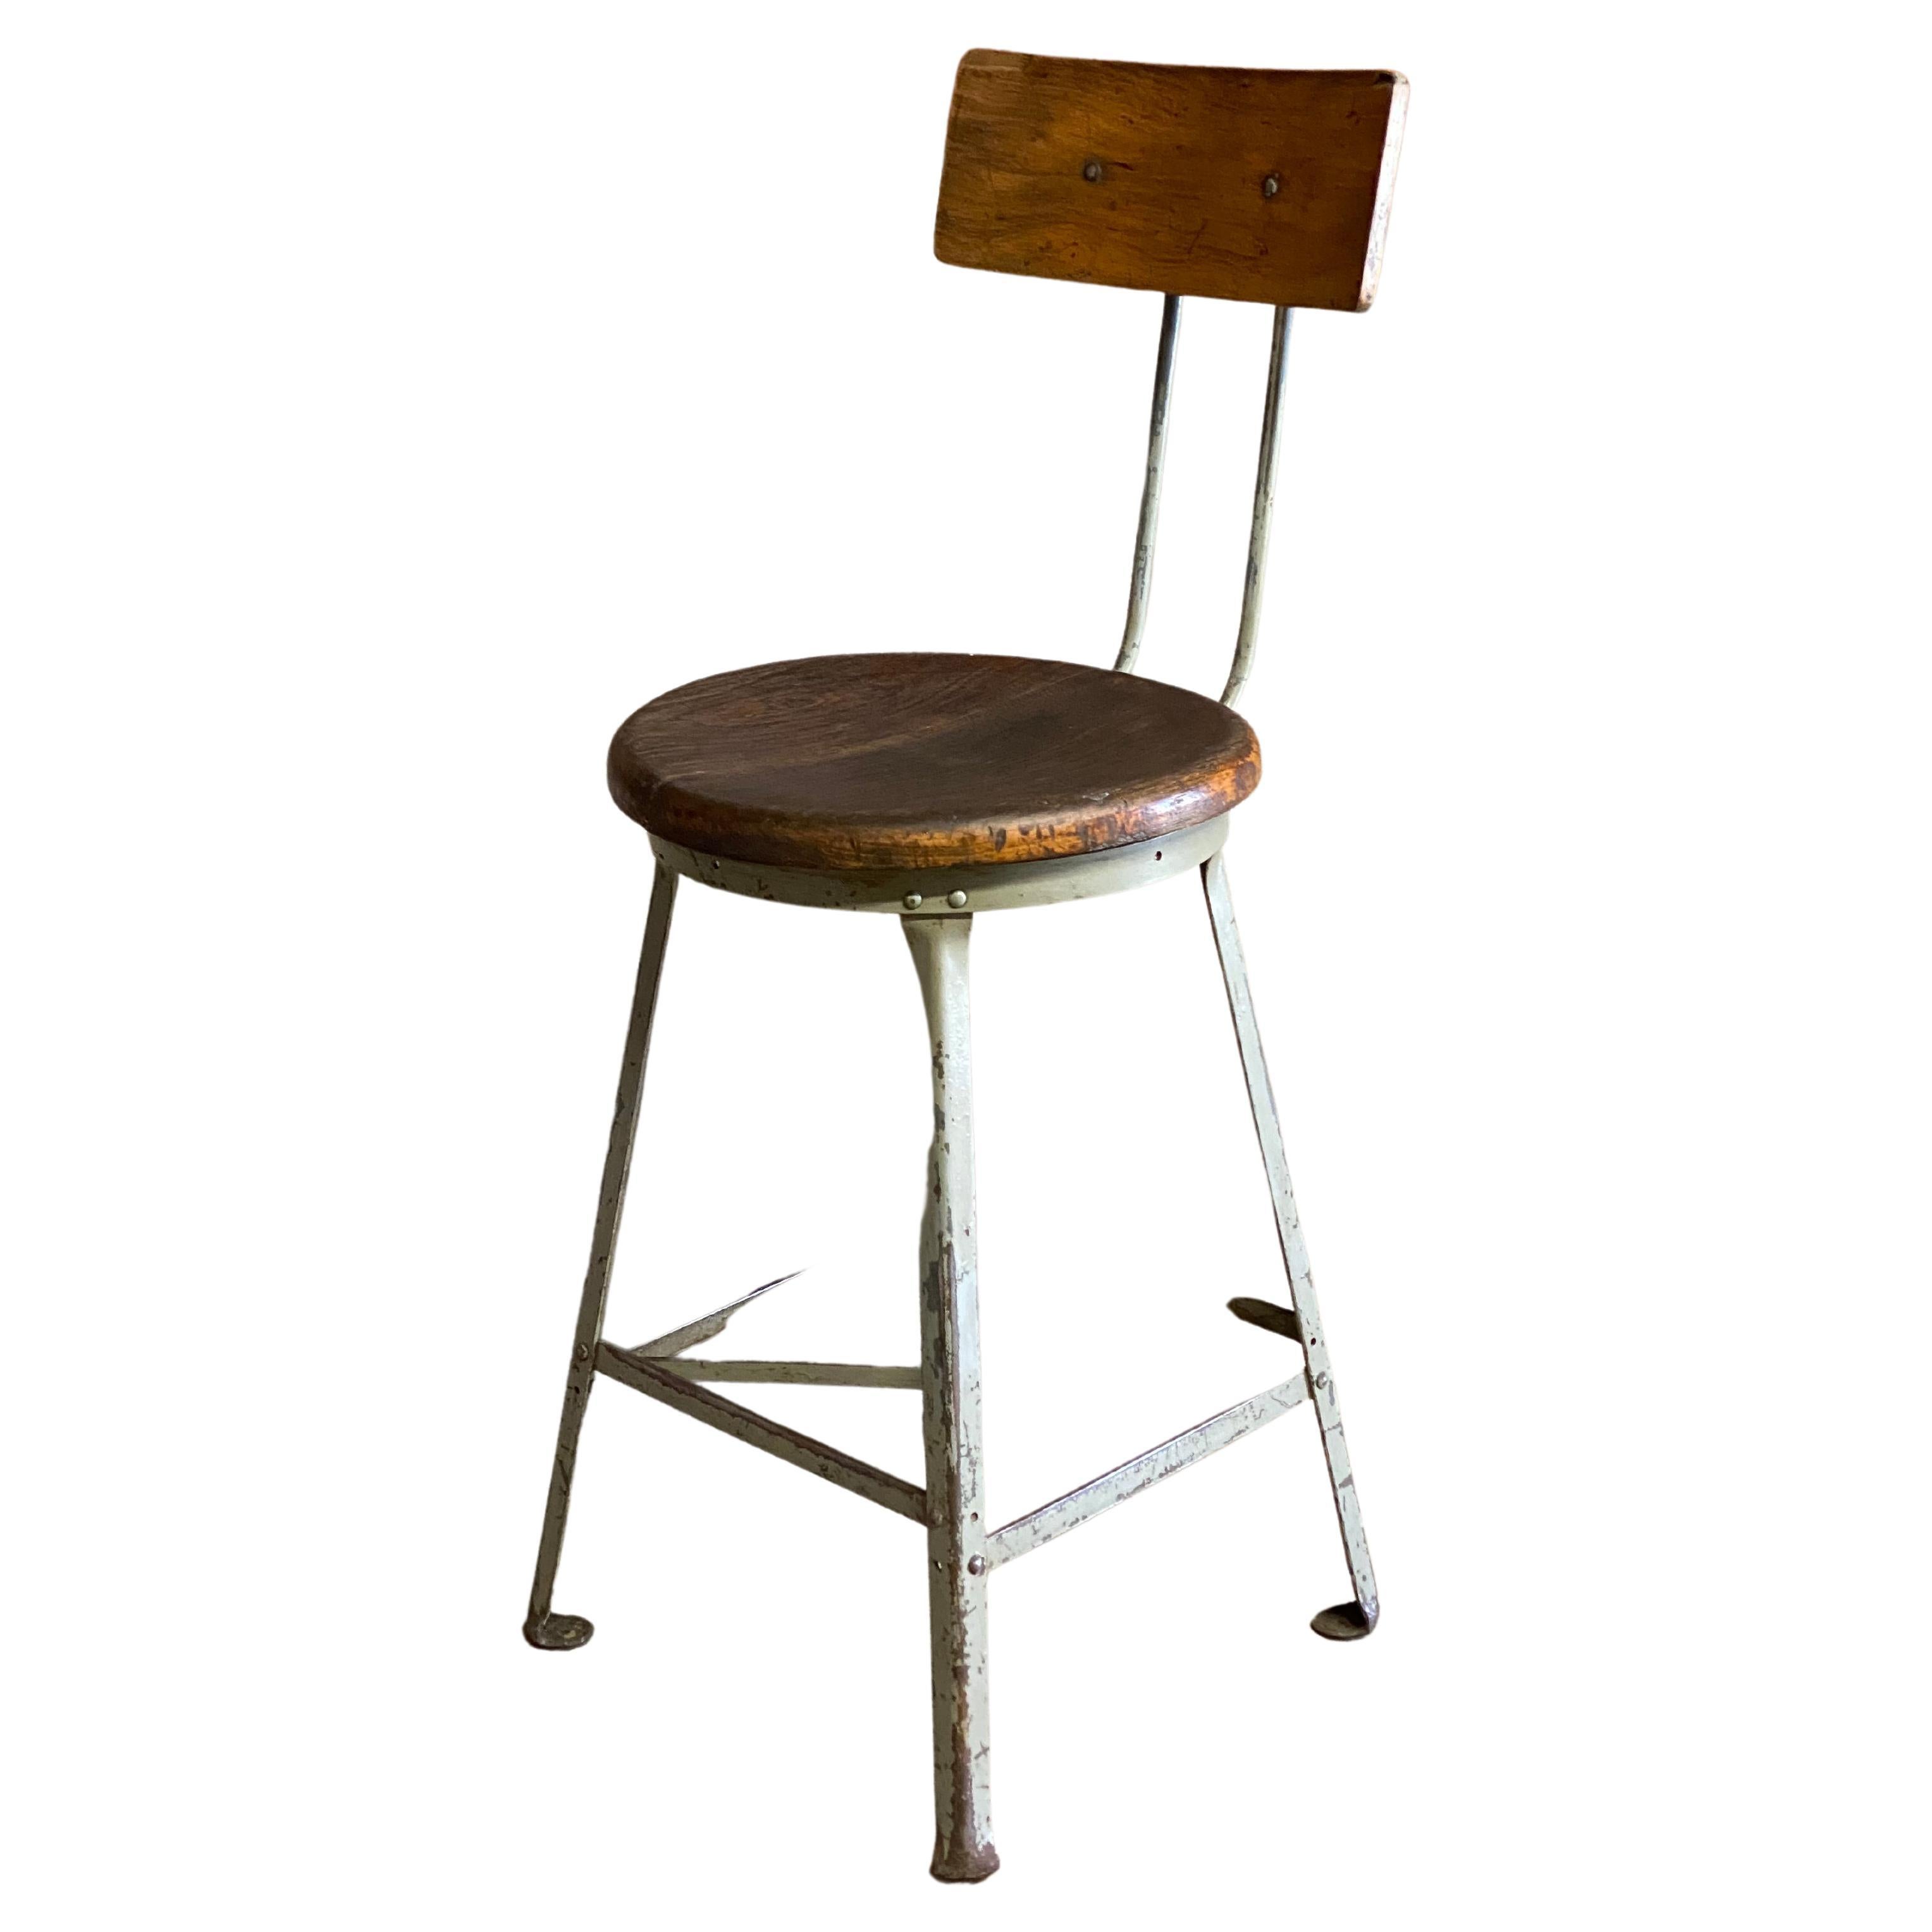 Angle Steel Stool Inc. adjustable industrial stool. Steel frame construction with solid wood (oak) seat and contoured back. Adjustable back height and depth. The seat height is stationary and does not swivel. Great for the kitchen island or a fine